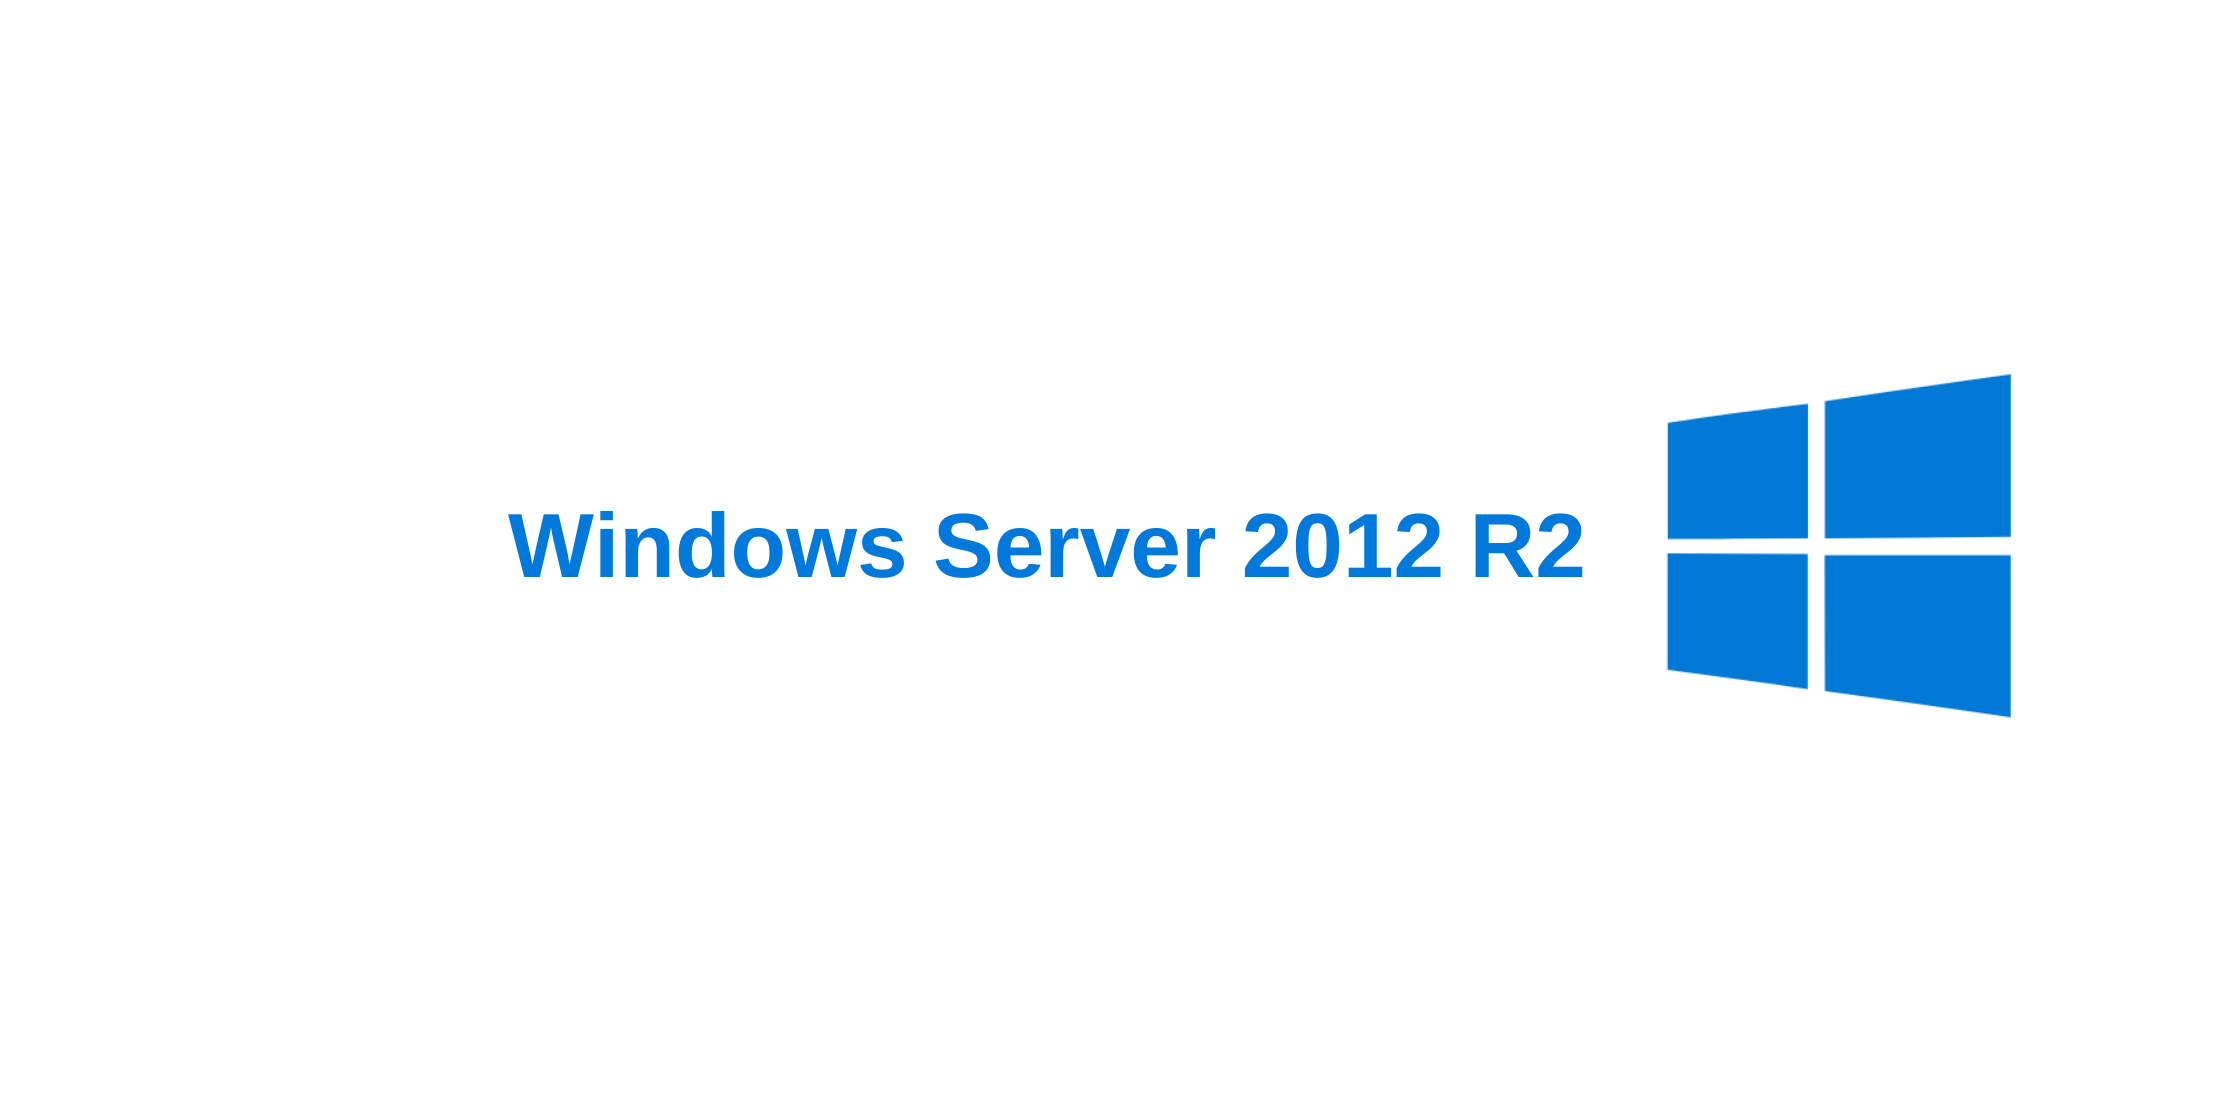 Calling All DocuWare Clients Running Windows Server 2012 R2